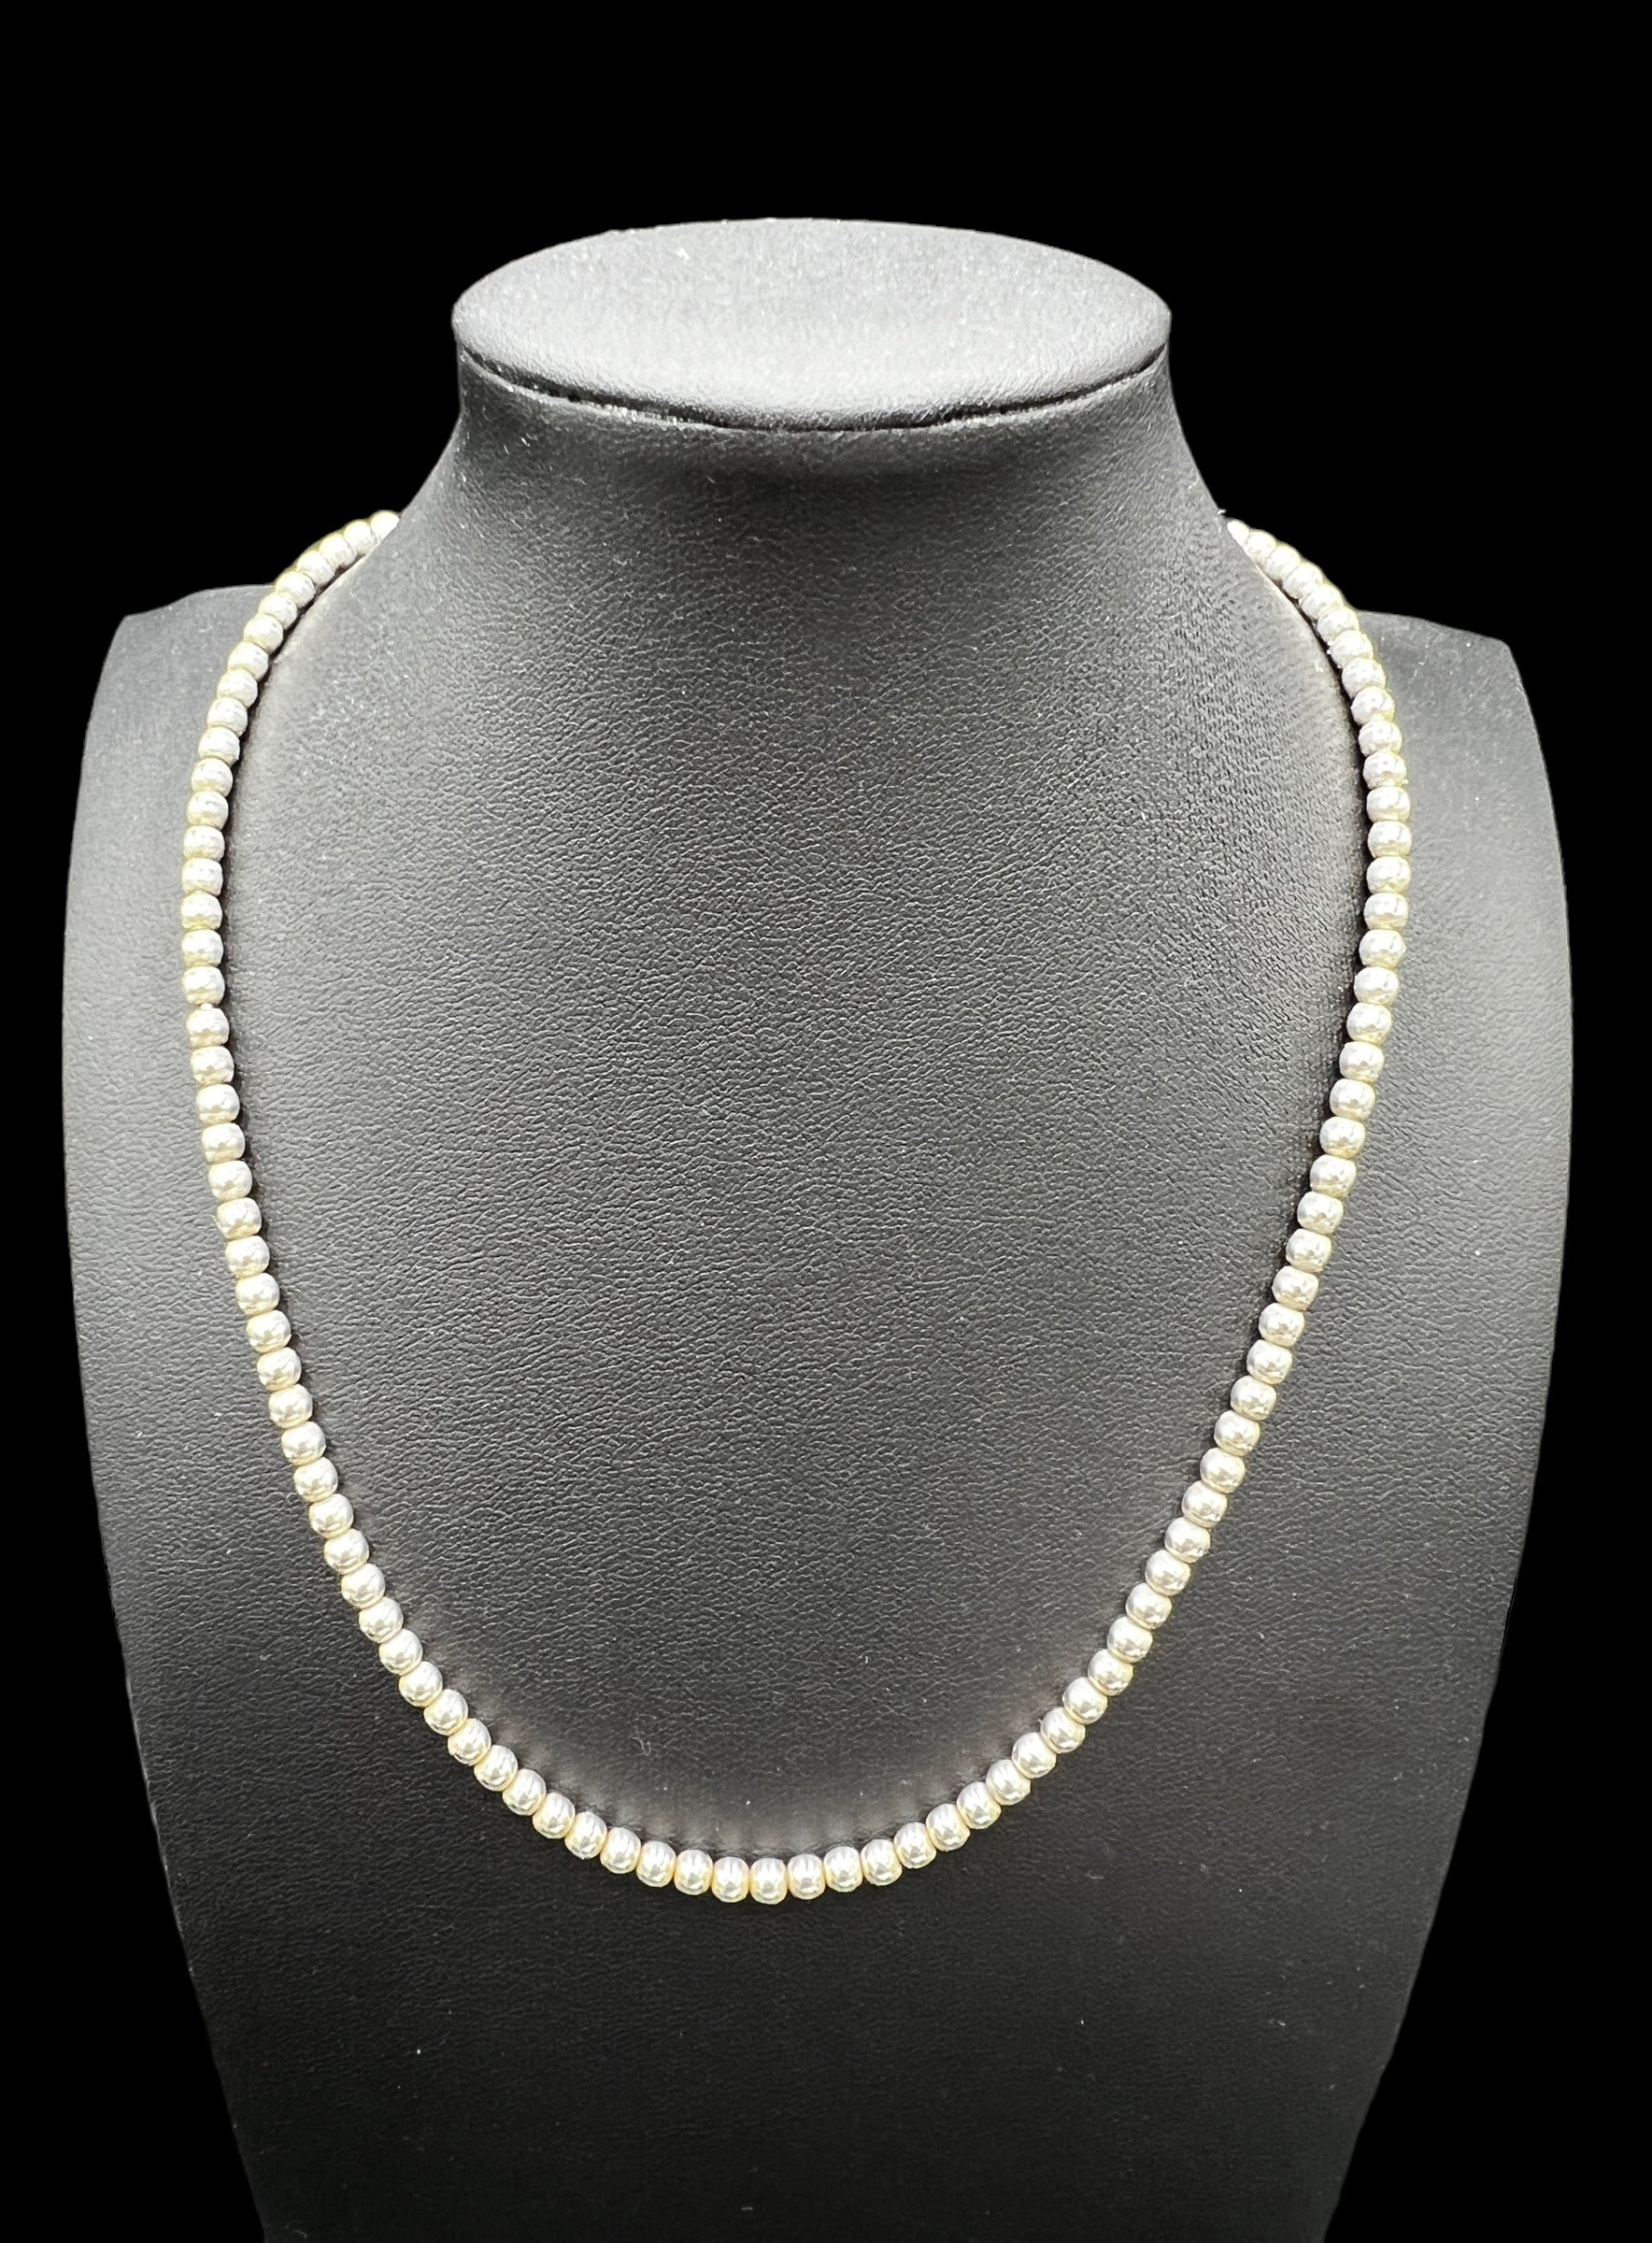 Miabella Sterling Silver Ball Necklace | 18” | 4mm Beads